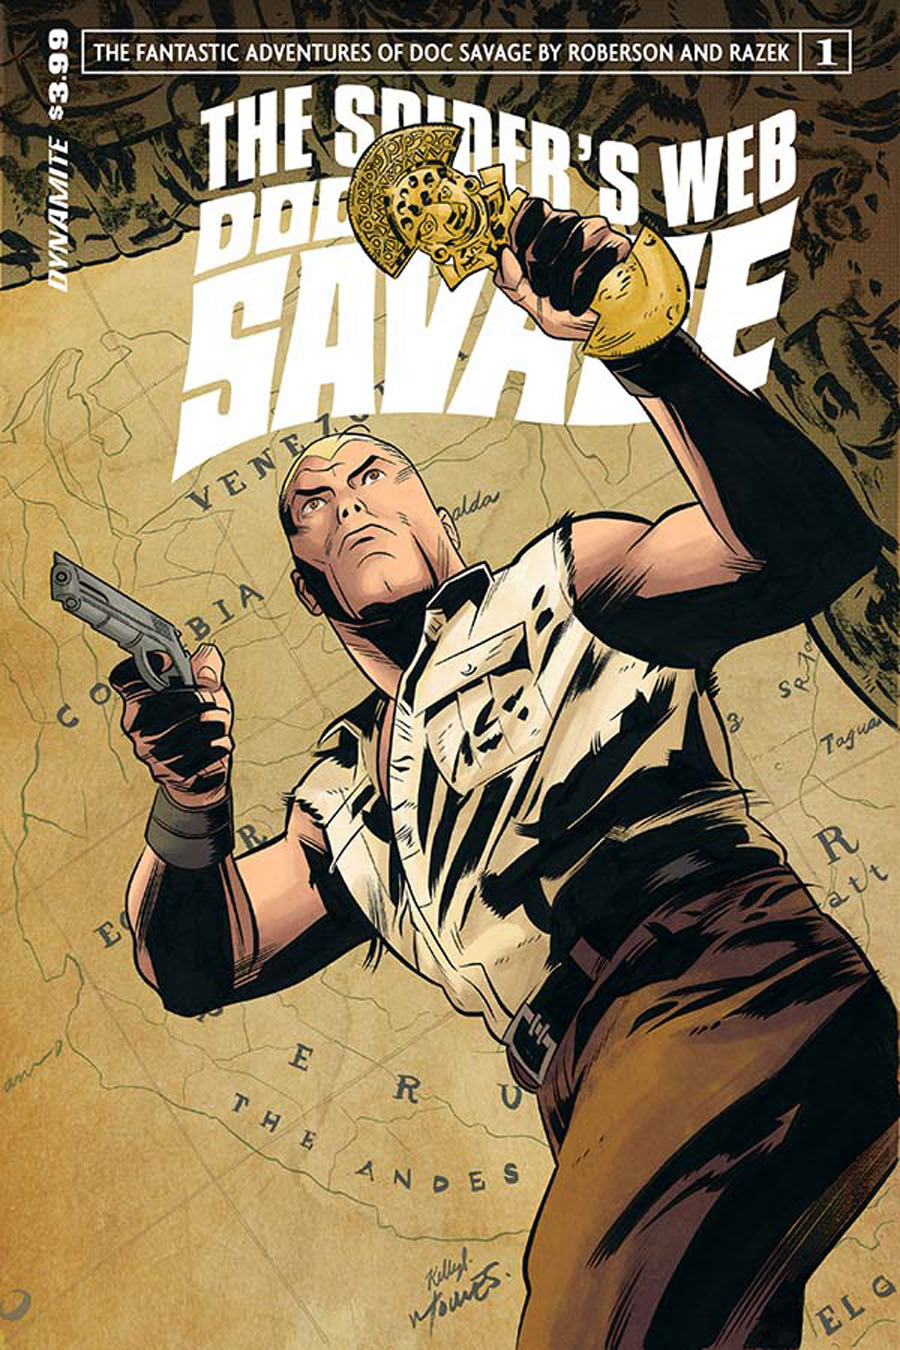 Doc Savage Spiders Web #1 Cover A Regular Wilfredo Torres Cover